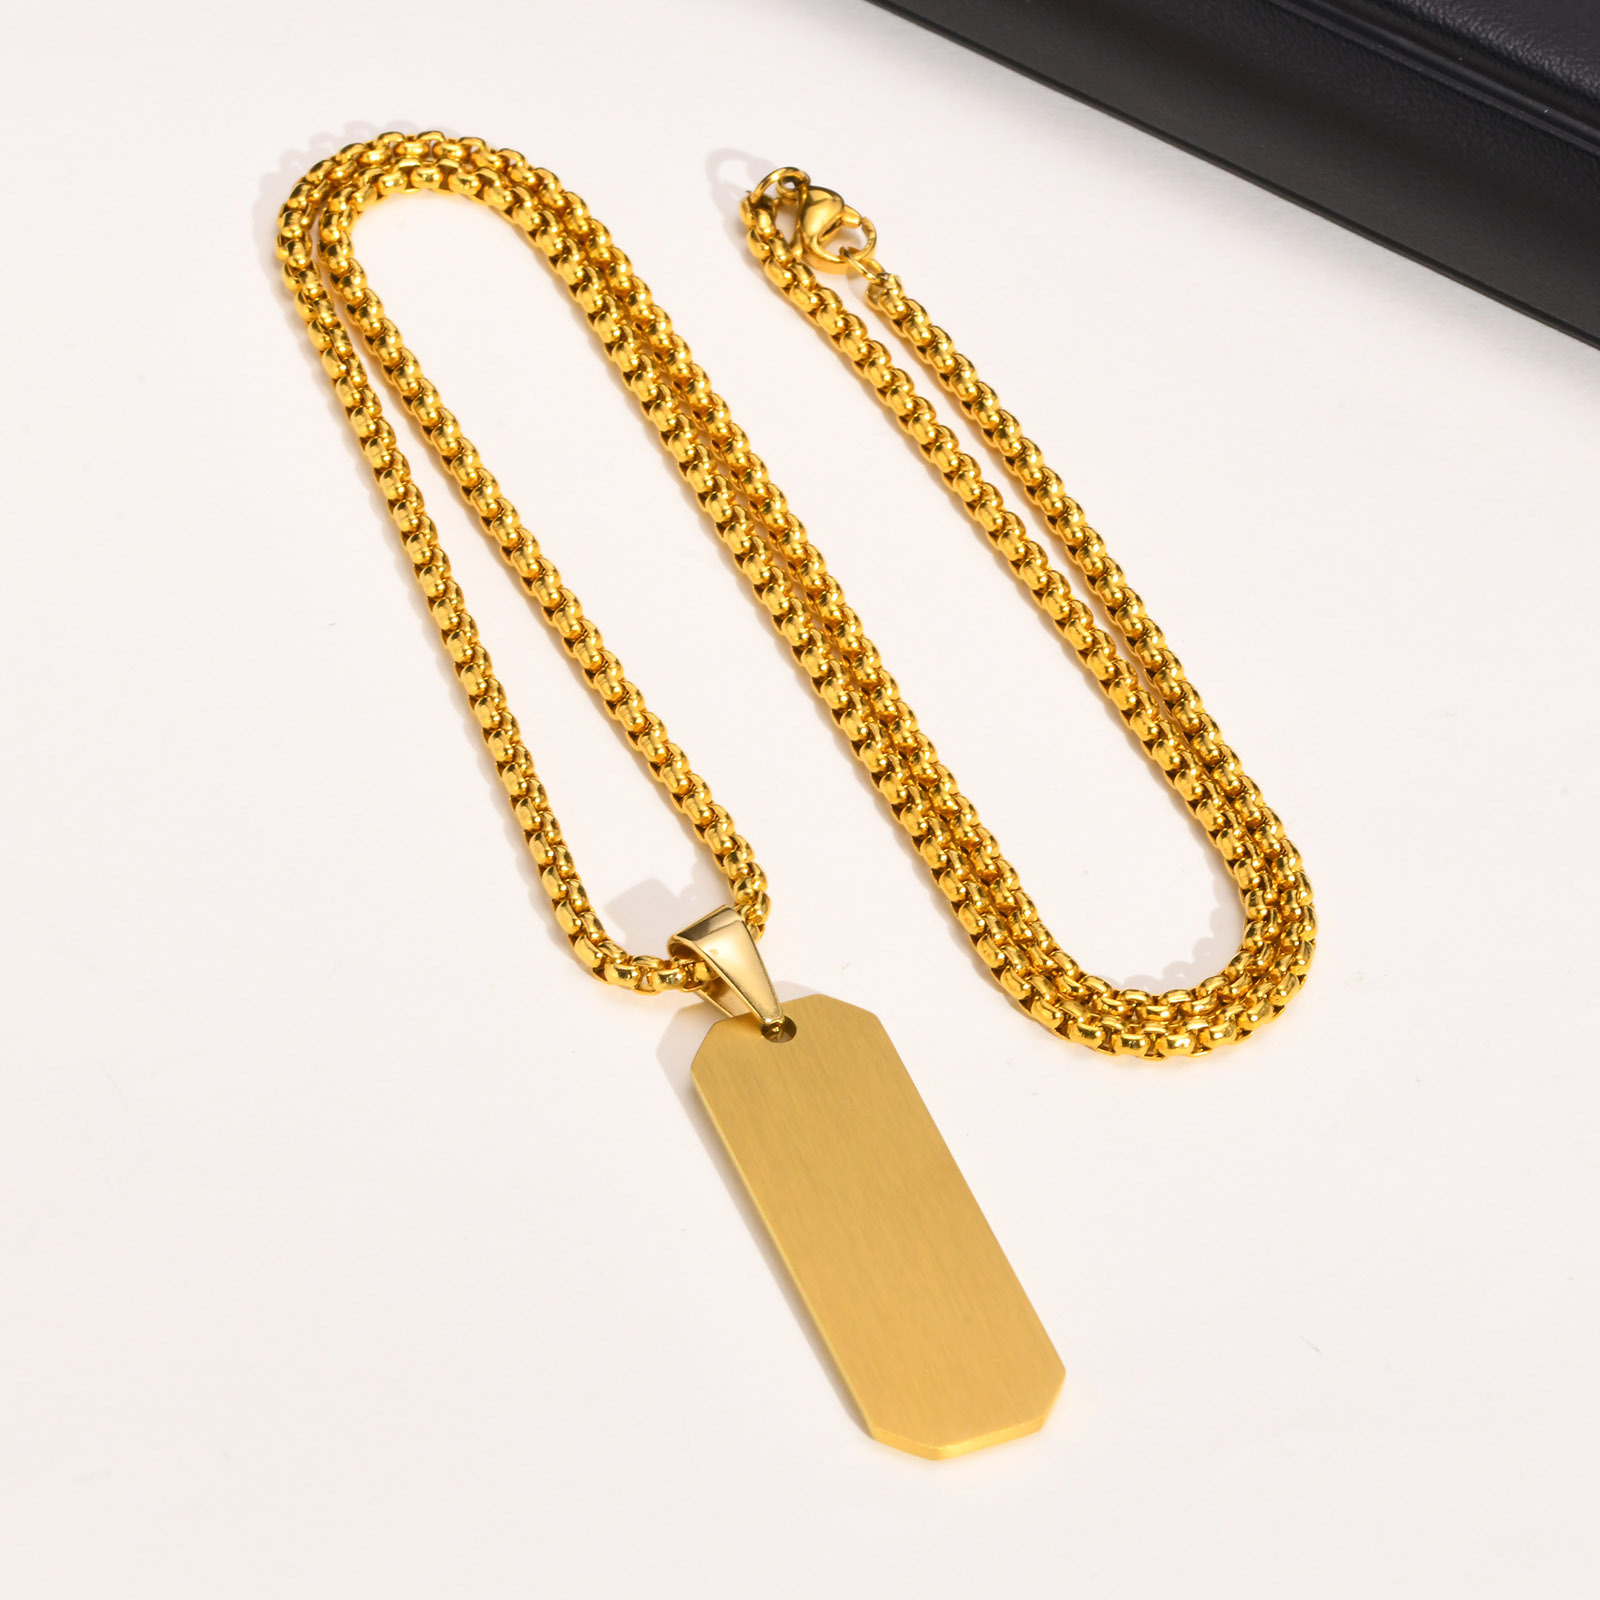 4:Gold pendant with chain